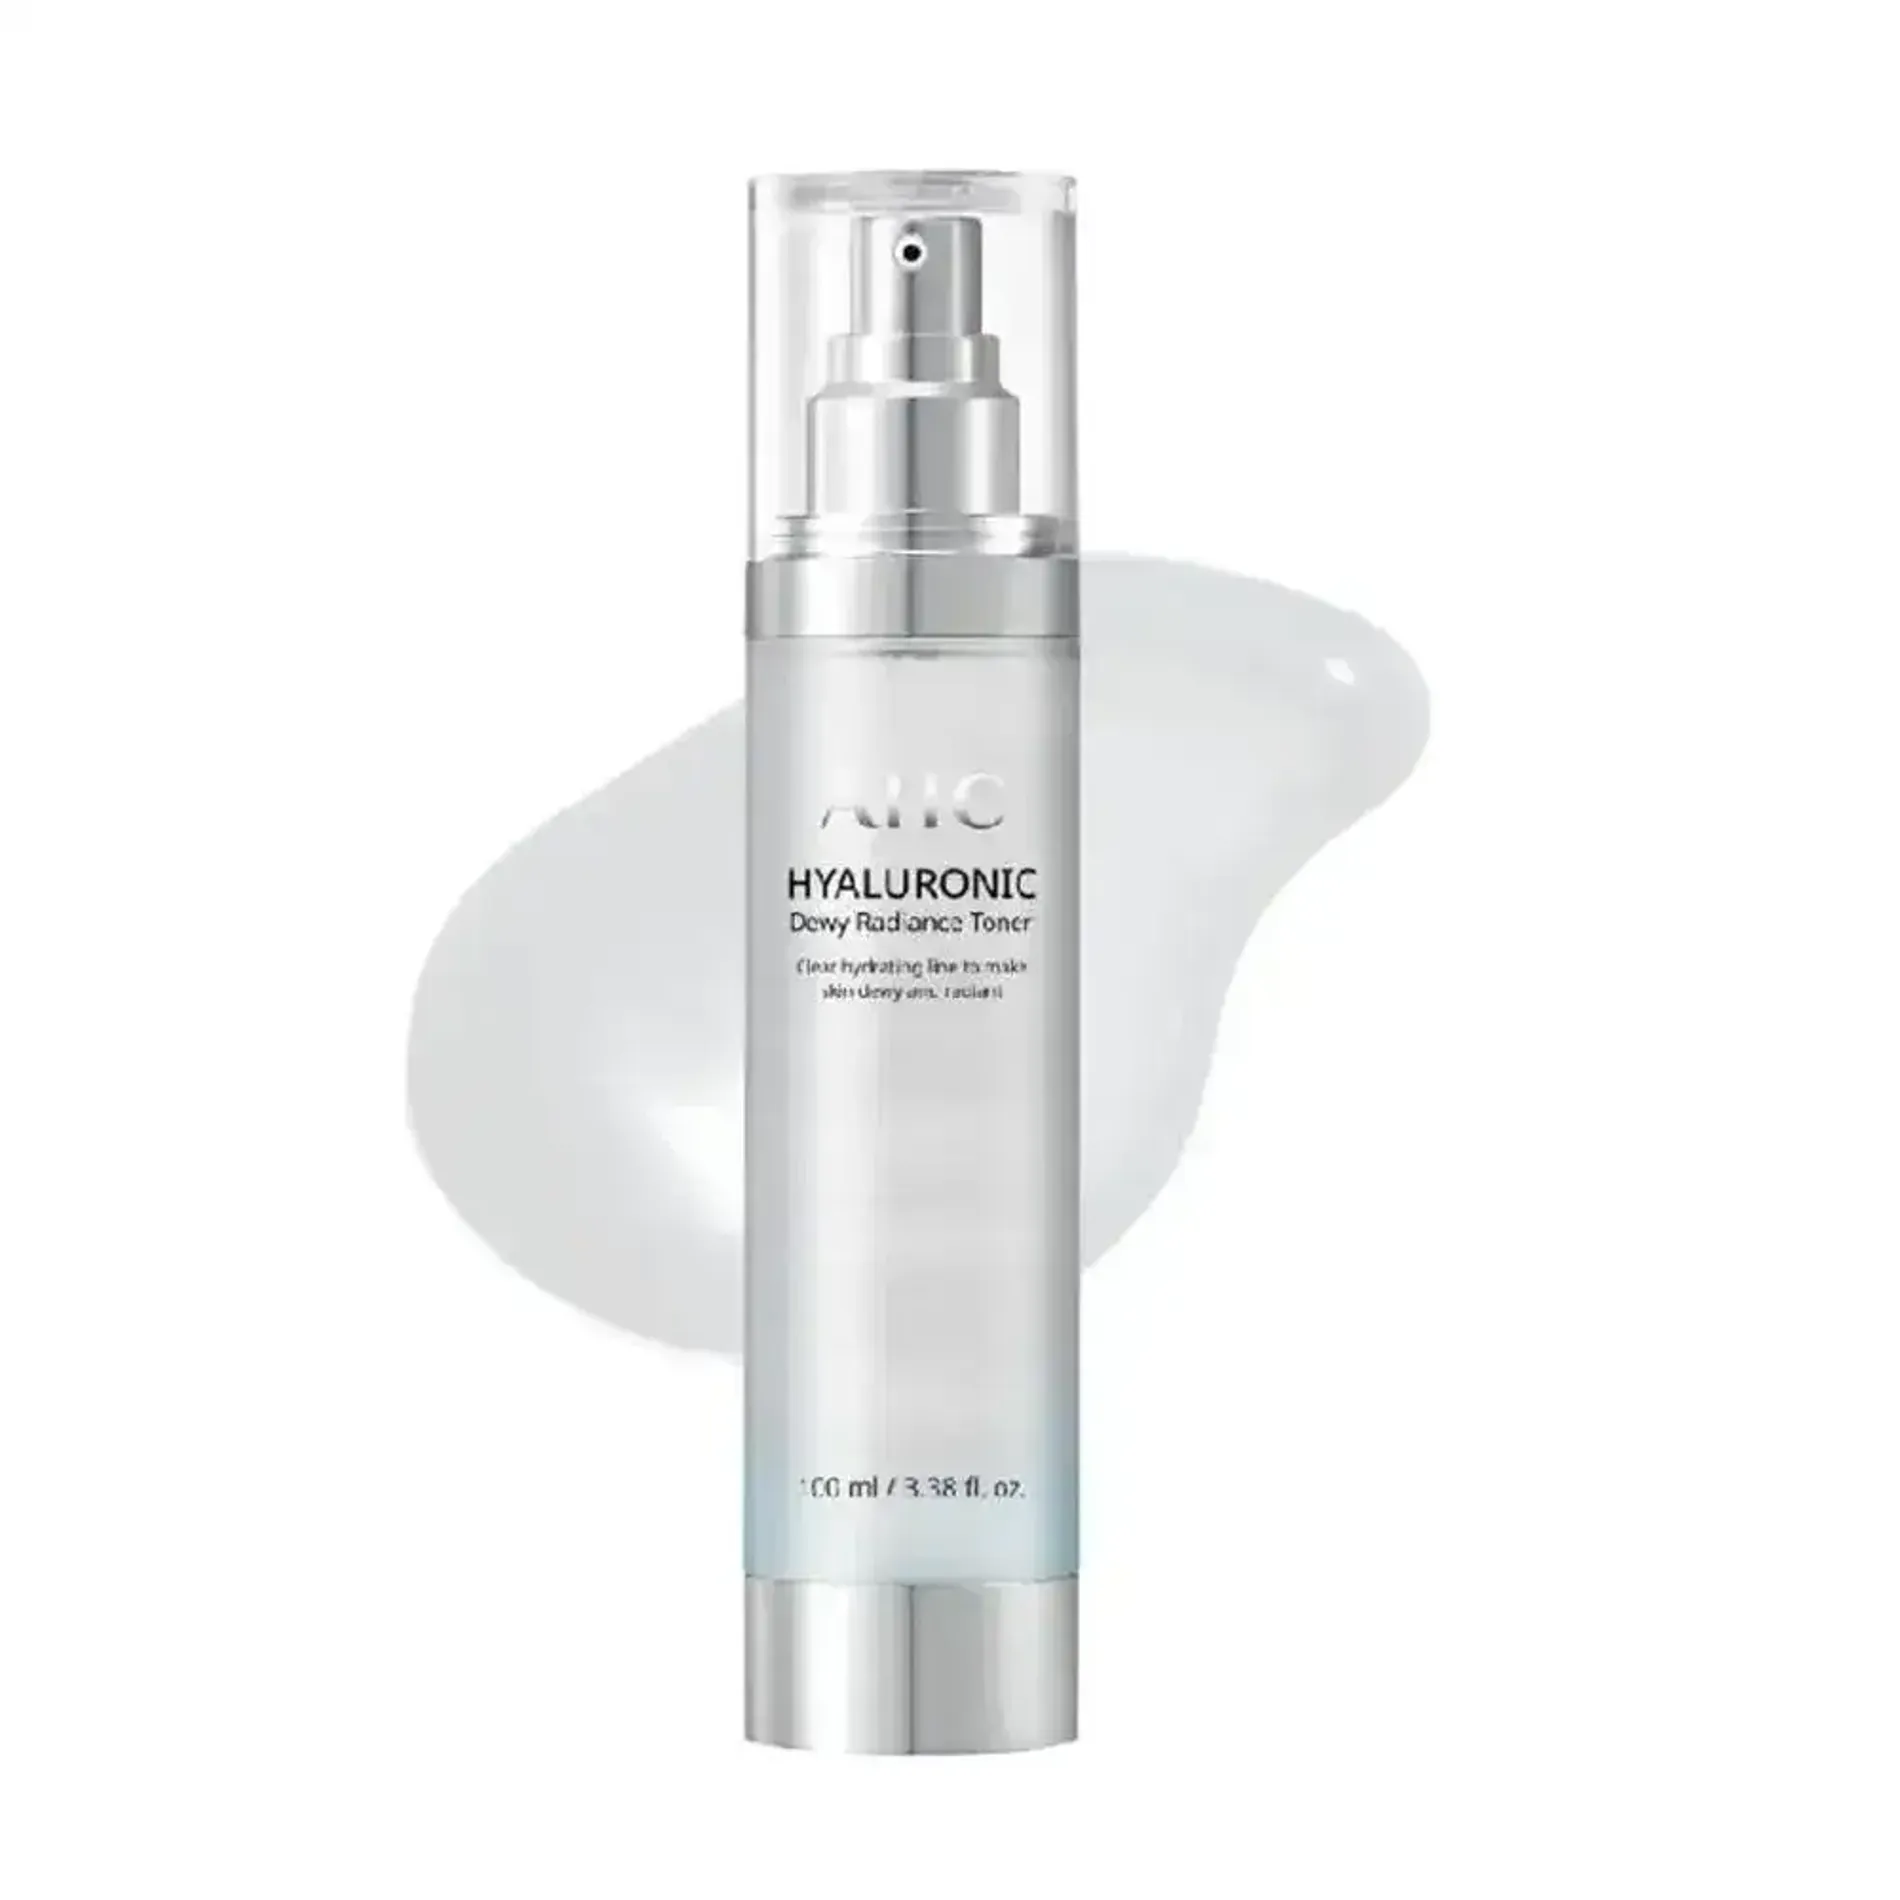 nuoc-can-bang-duong-am-lam-sang-da-ahc-hyaluronic-dewy-radiance-toner-100ml-1